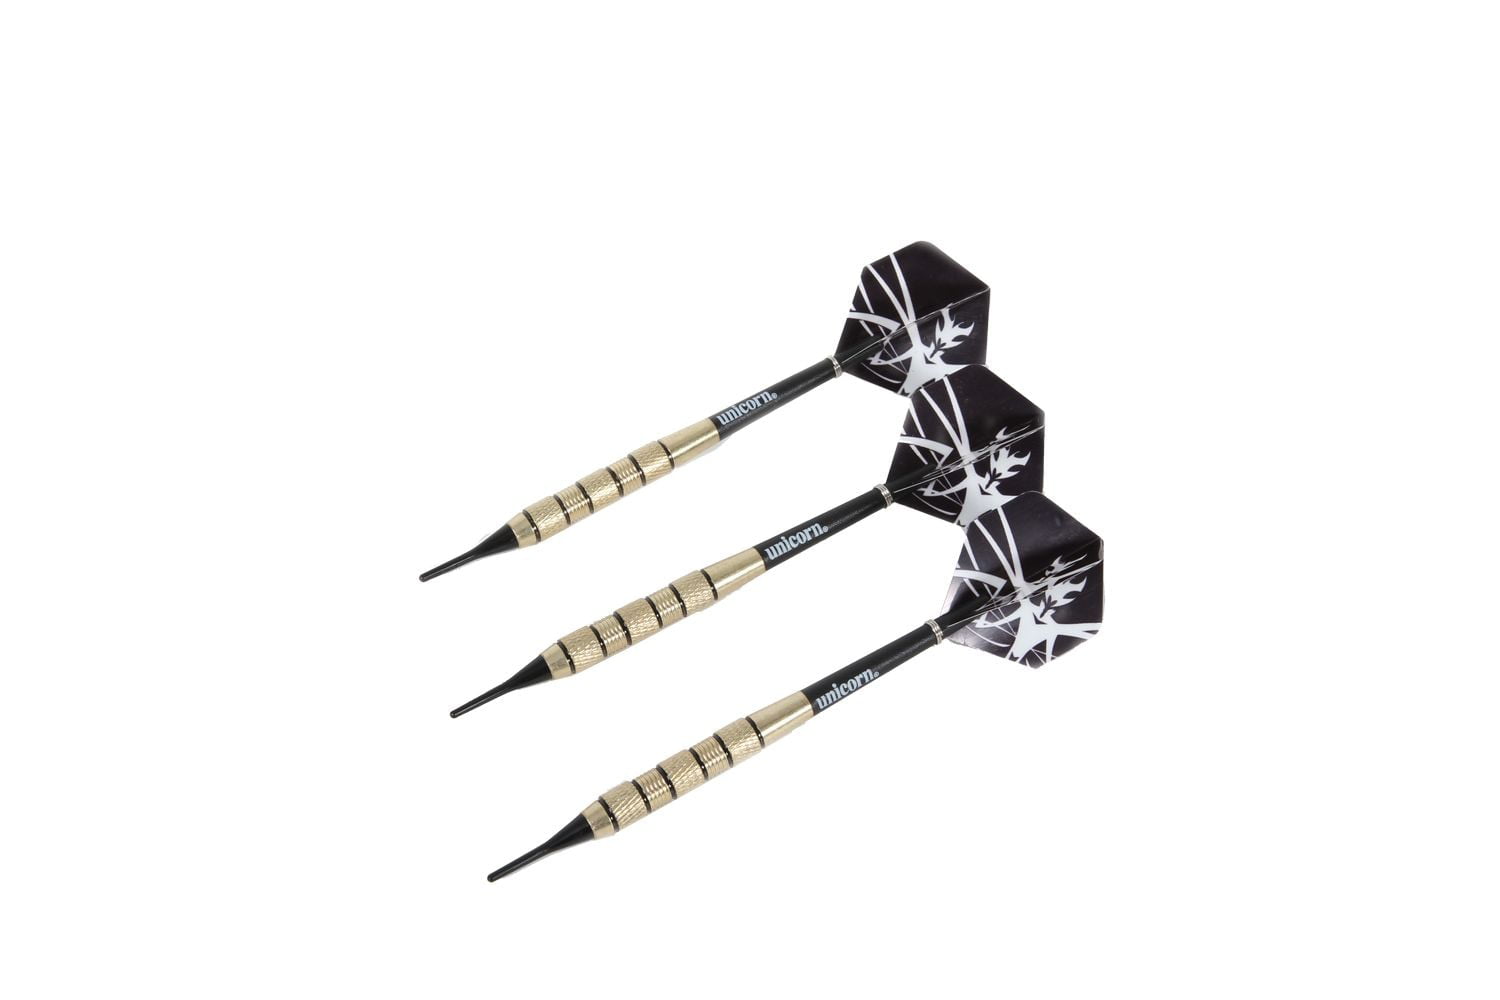 Details about   Unicorn EL10 16g Soft Tip Darts New in Box Set of 3 Polyester Flight 